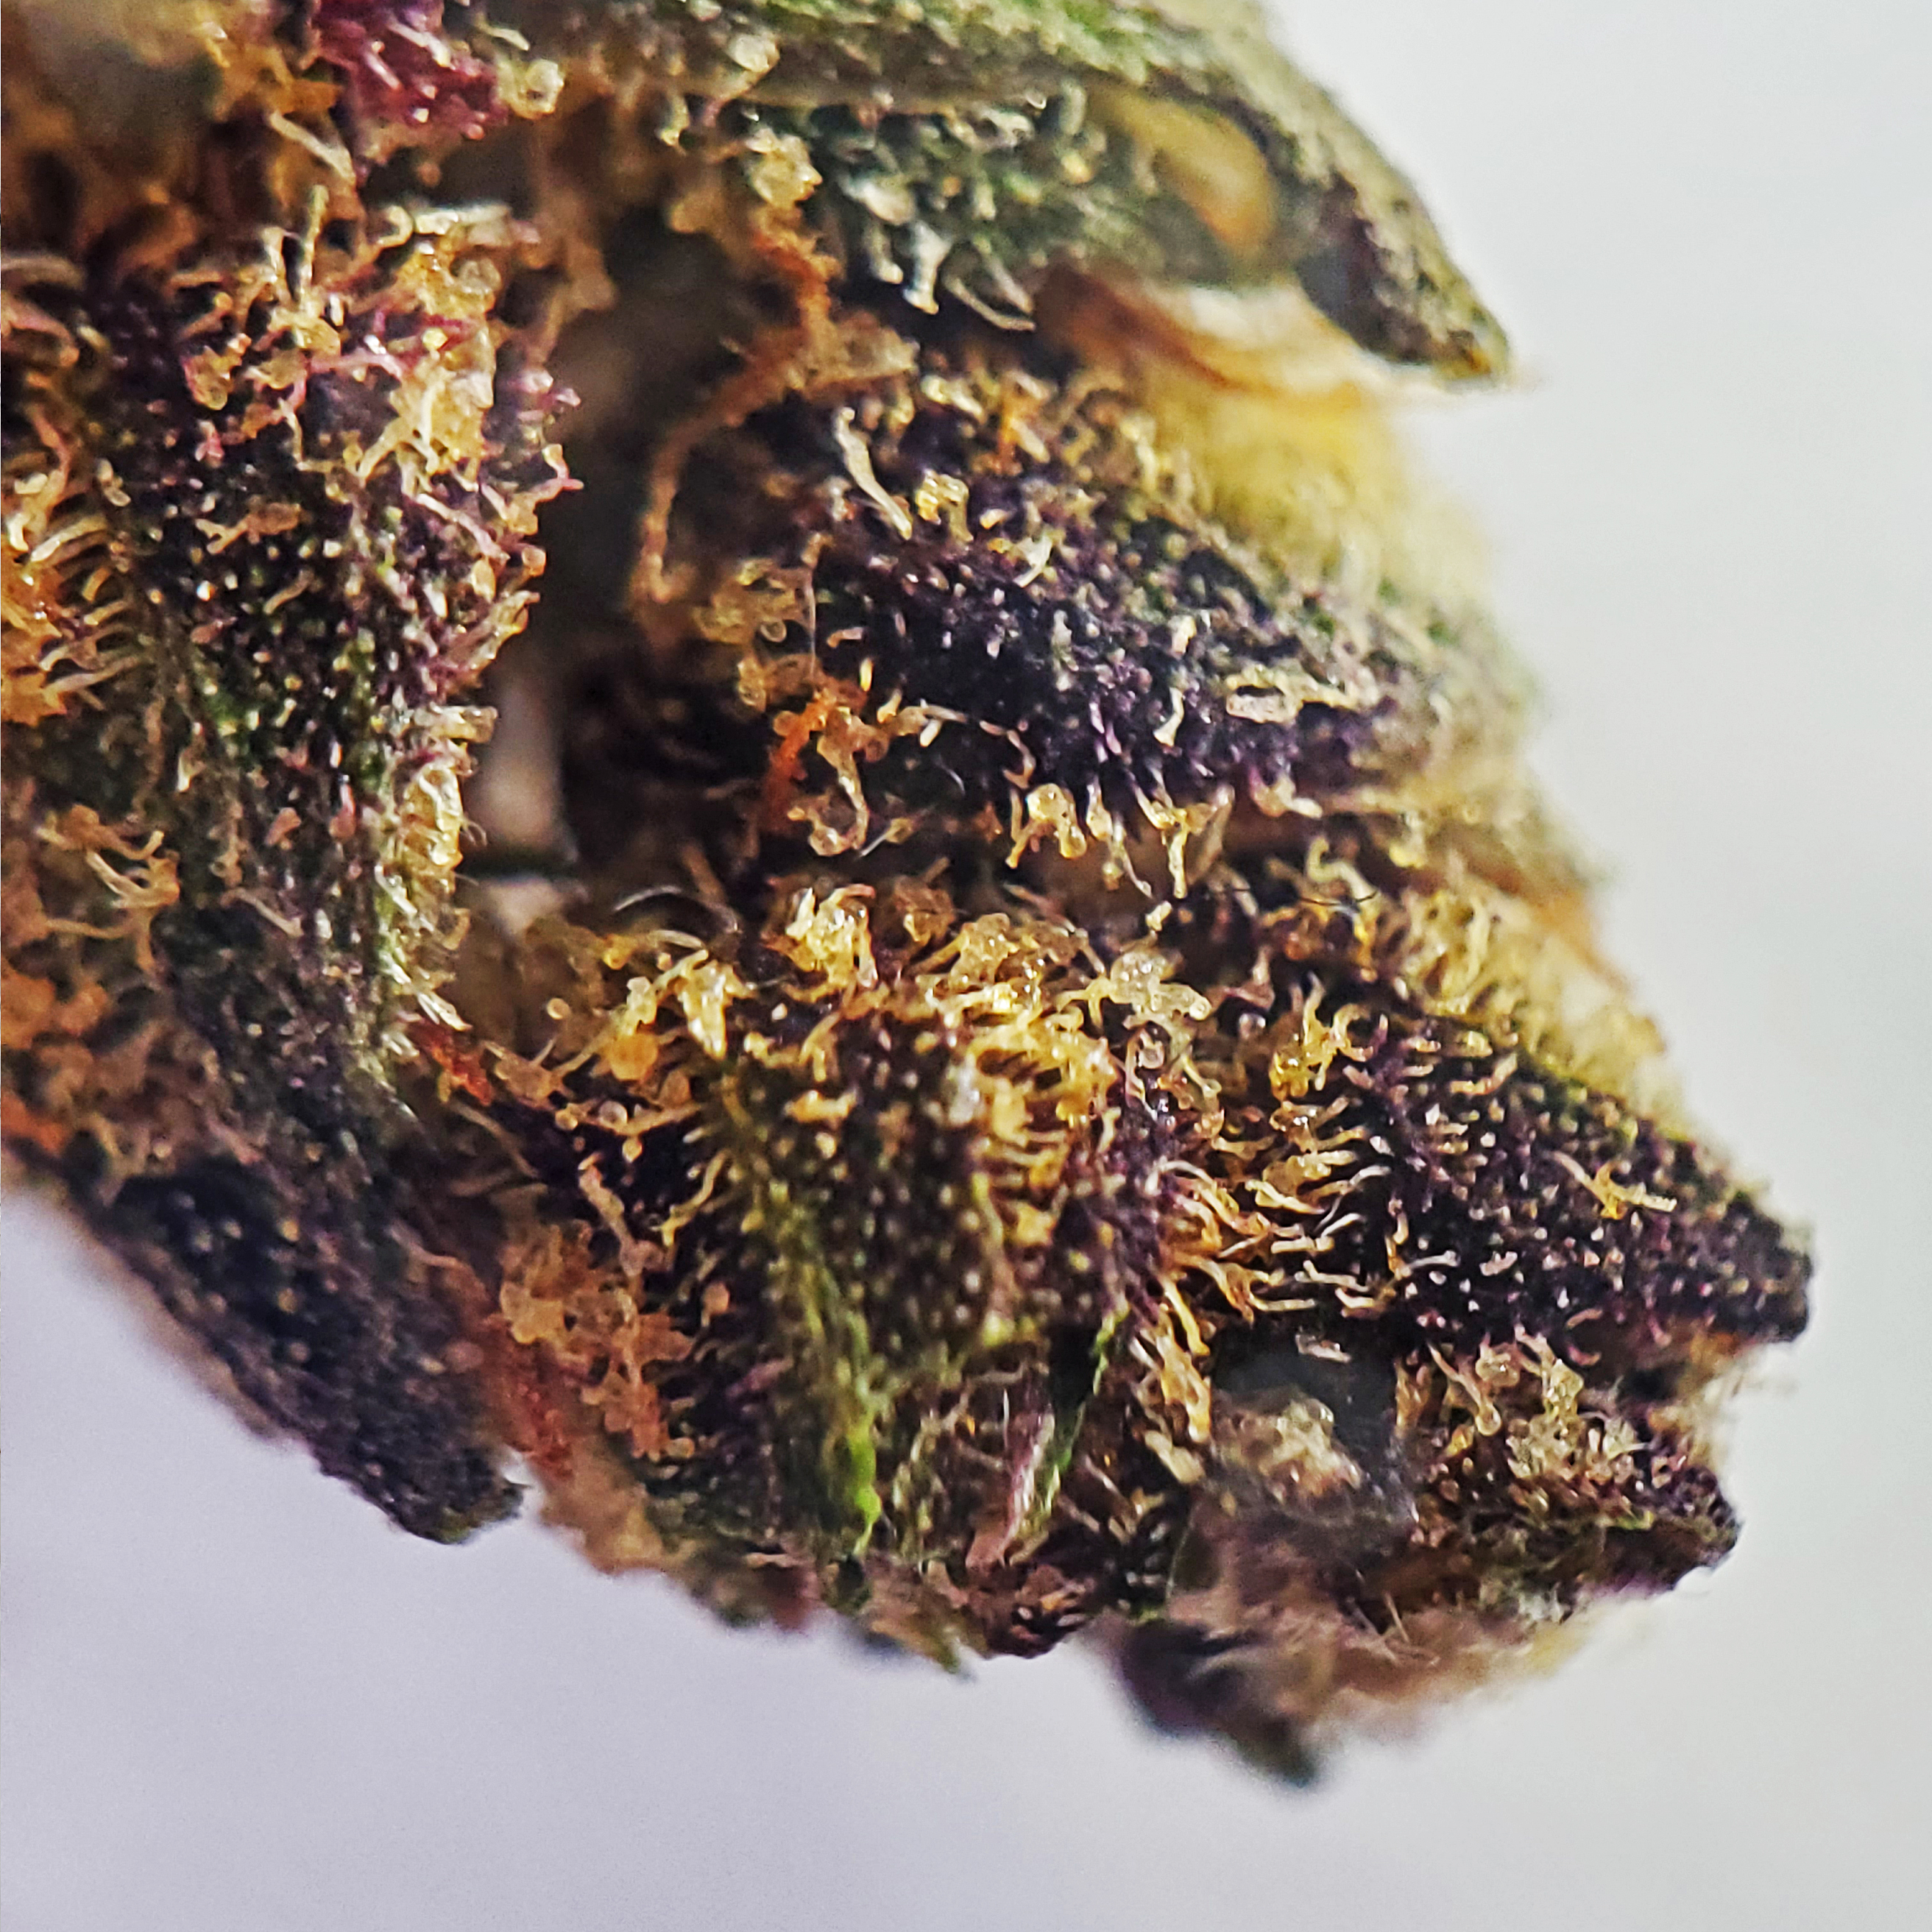 Woodstock Canadian Cannabis Licensed Producer Purple Chitral Indica Weed Strain Review - Stashmagazine.ca - Volume 1